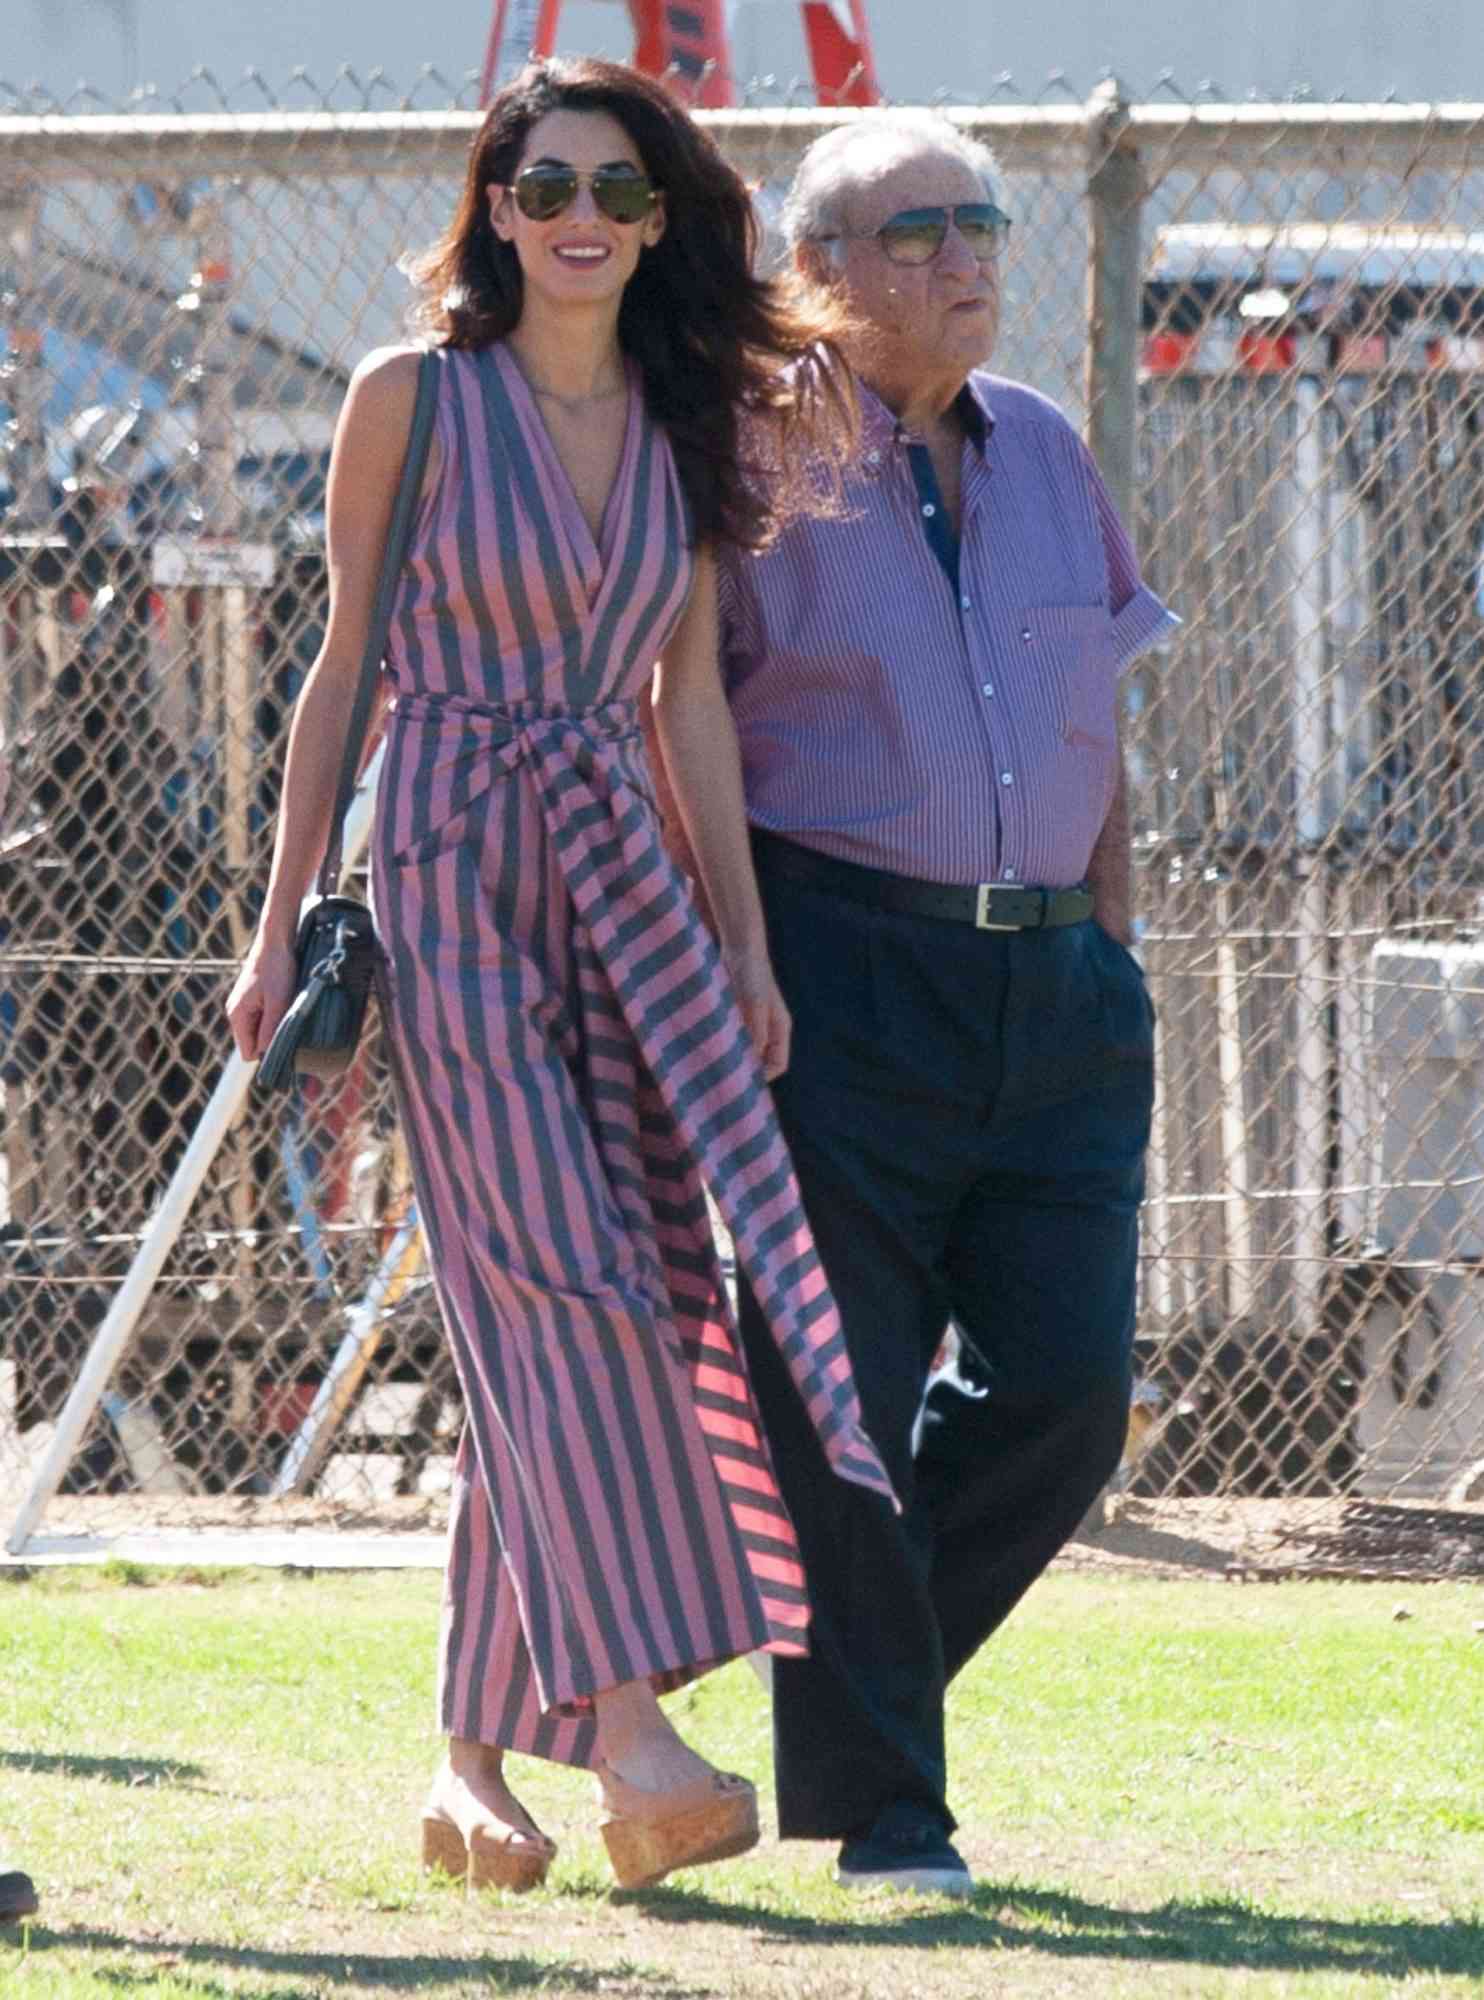 George Clooney and Amal Clooney and her Father on Set of Suburbicon.